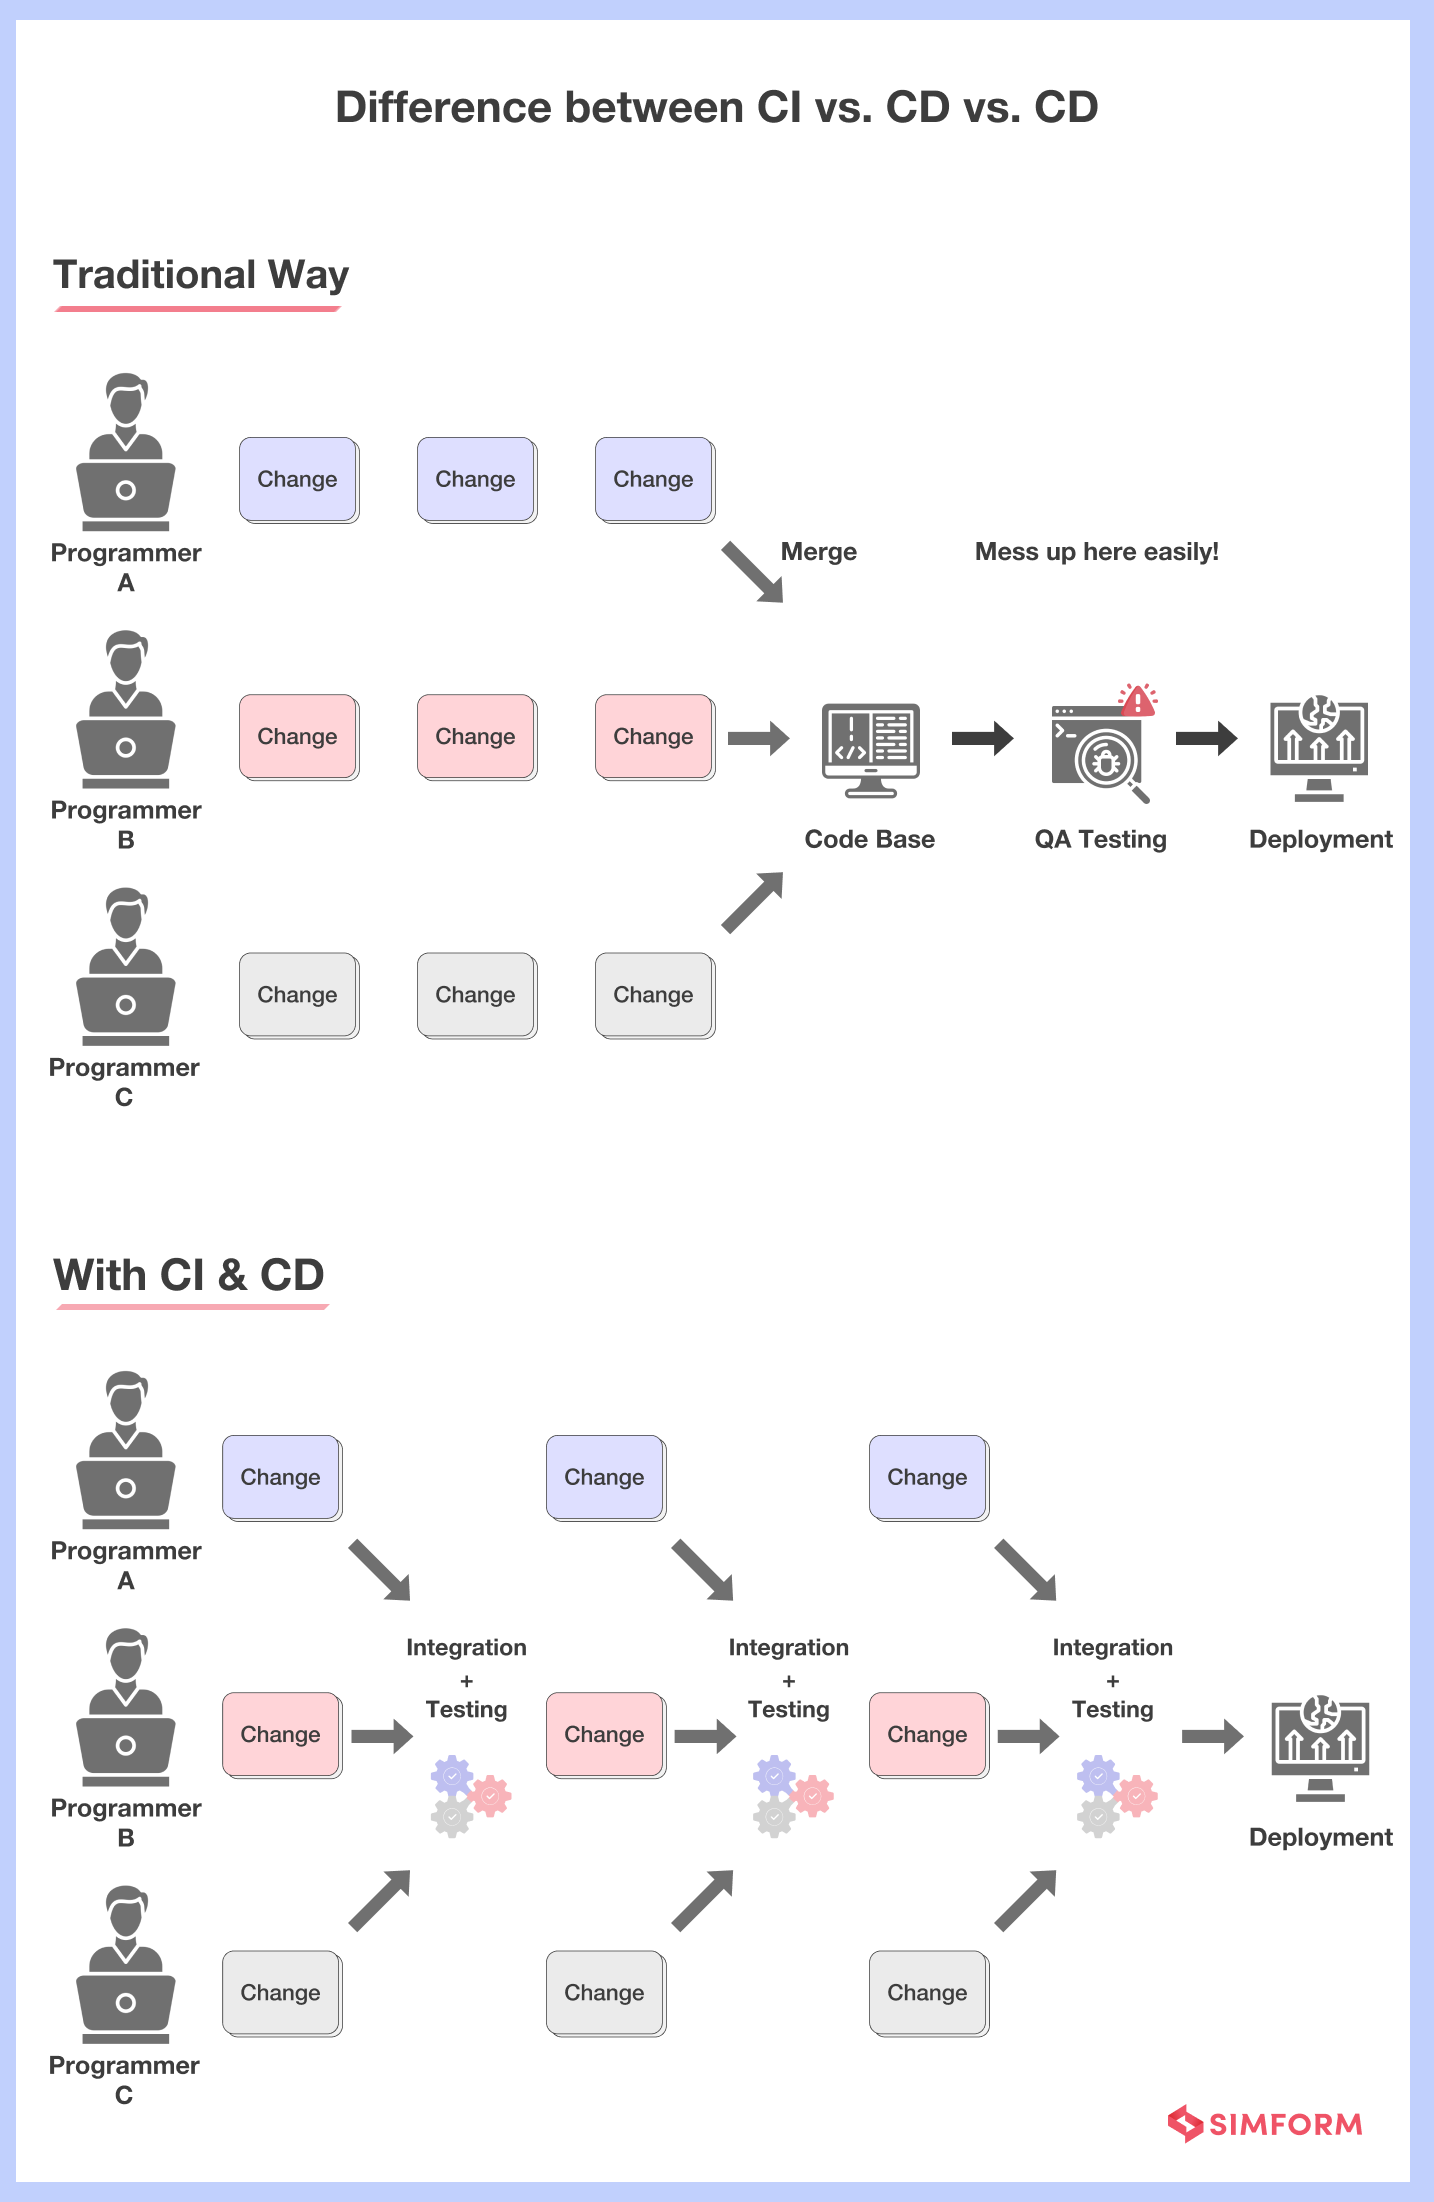 Difference between CI CD